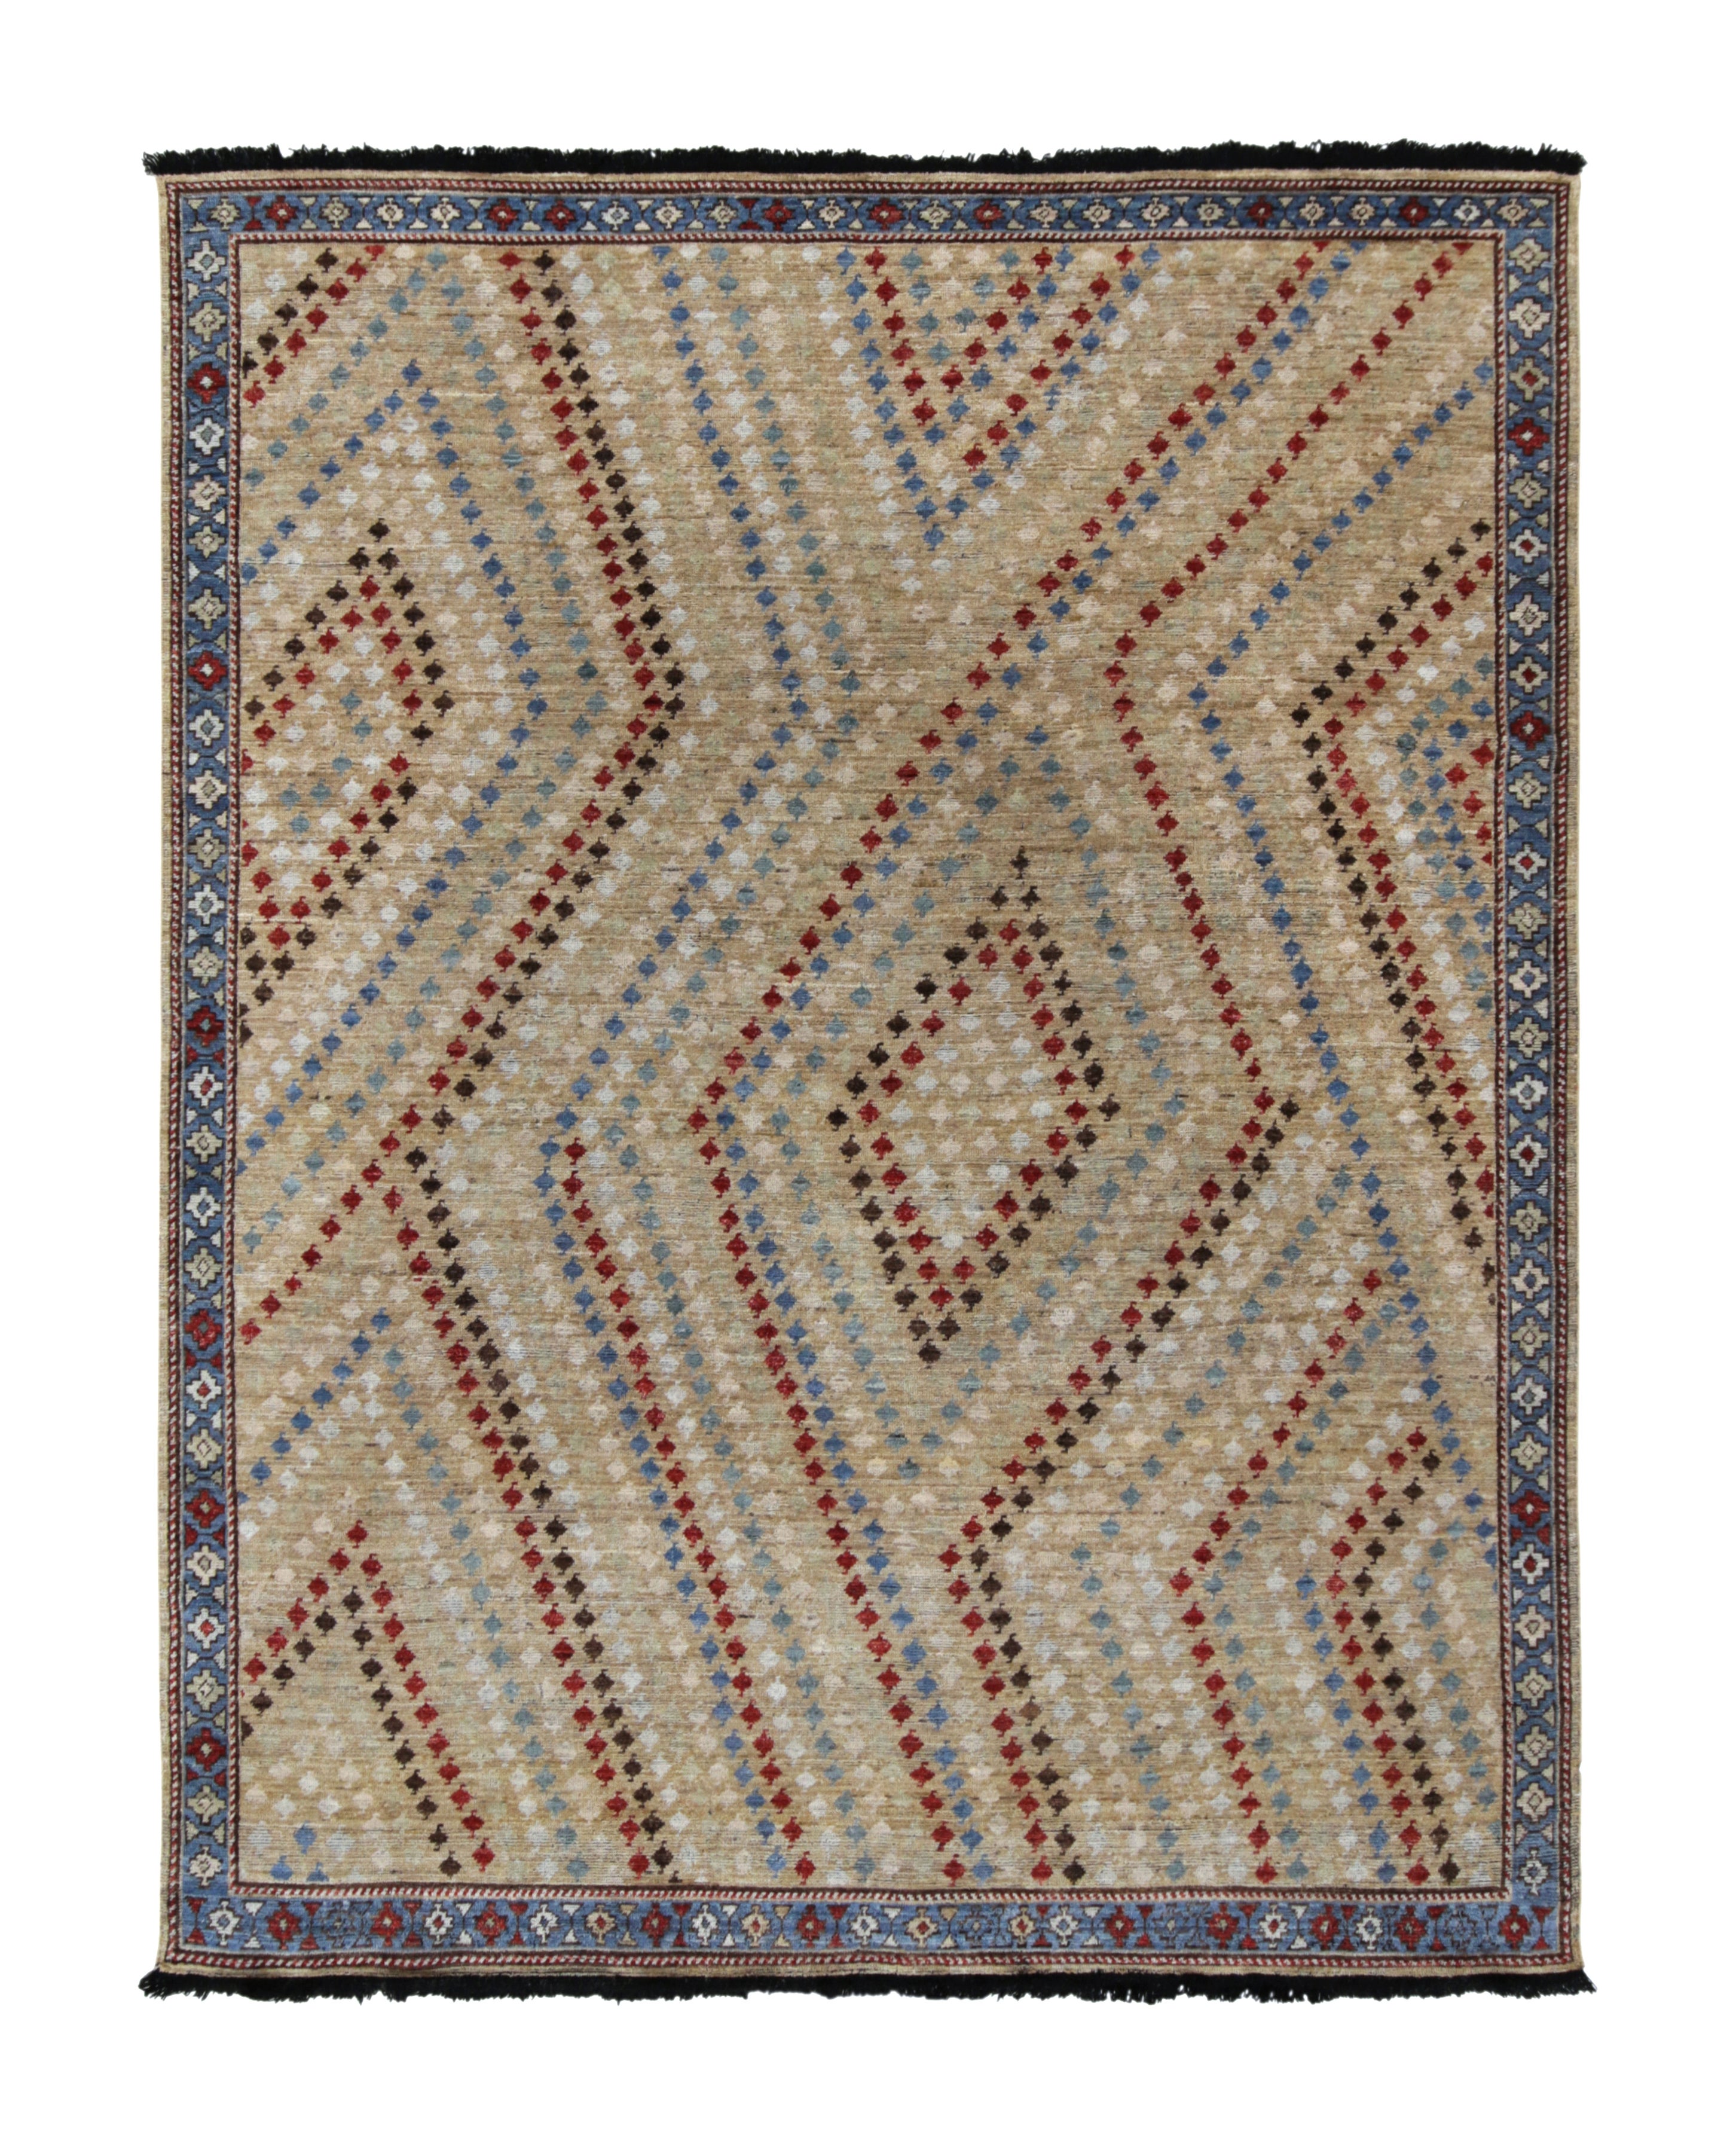 Rug & Kilim’s Tribal Style rug in Beige with Red, Blue & White Geometric Pattern For Sale